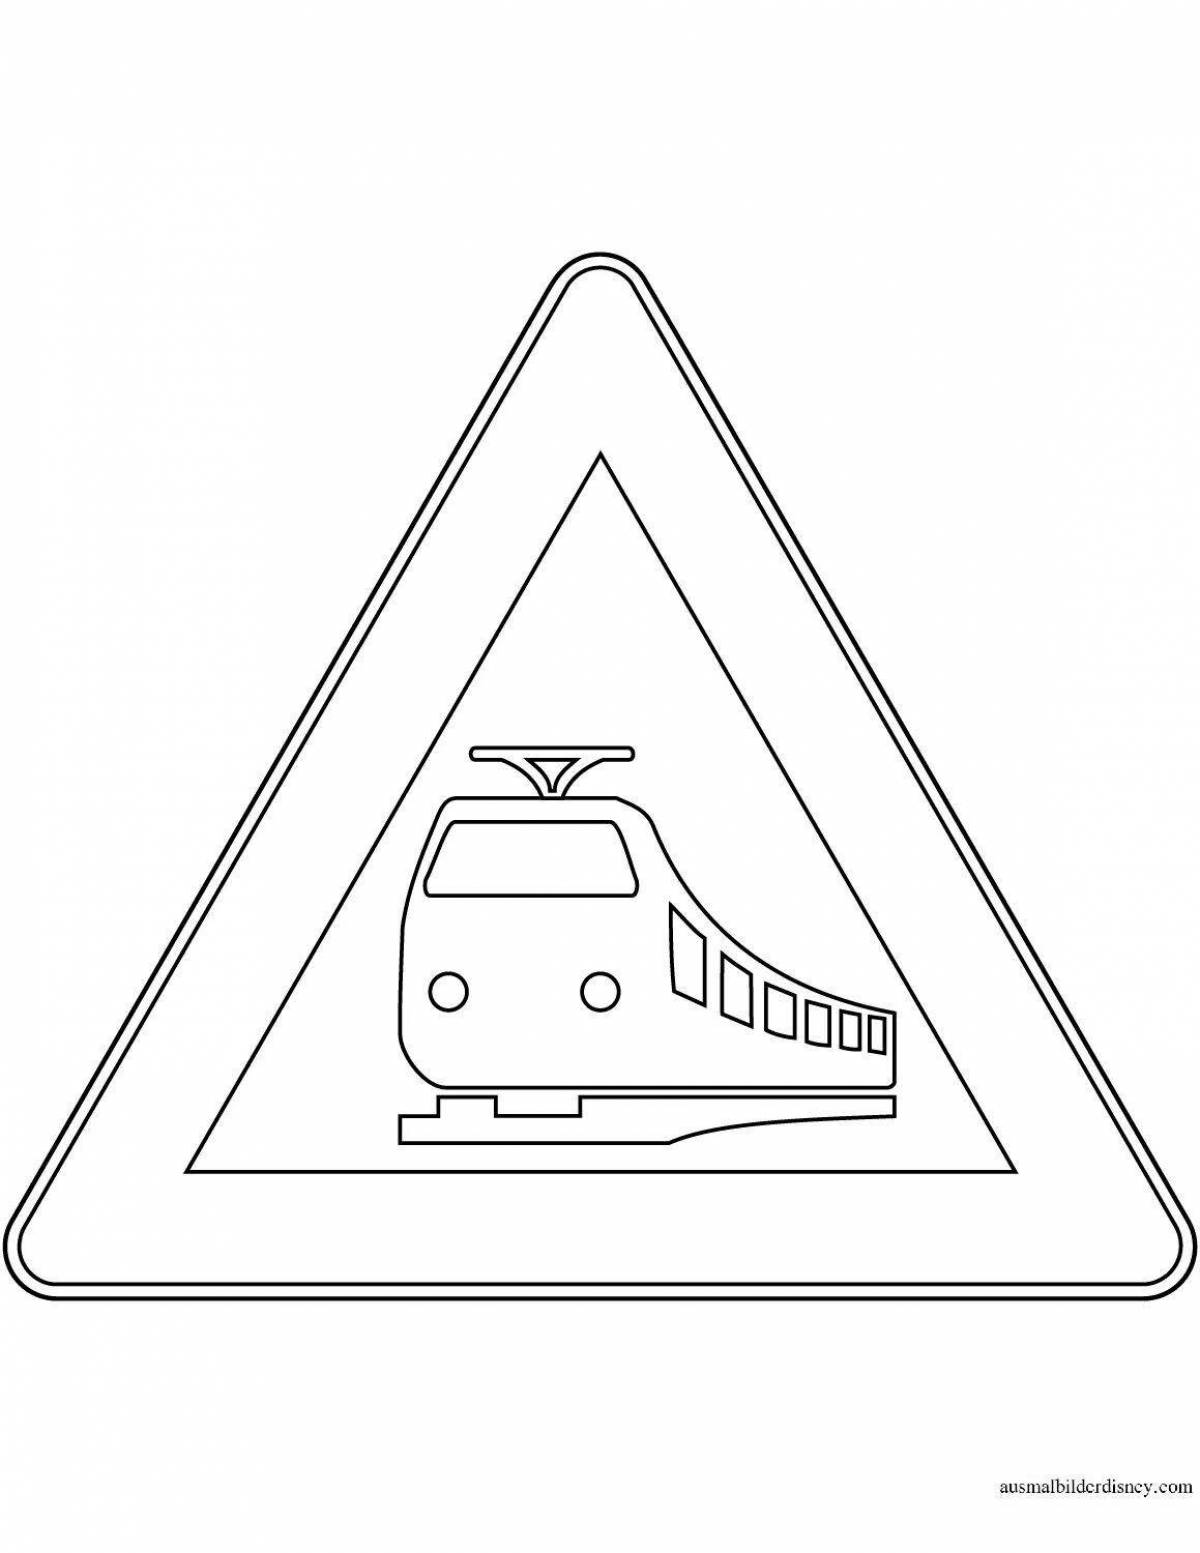 Sweet warning road signs coloring page